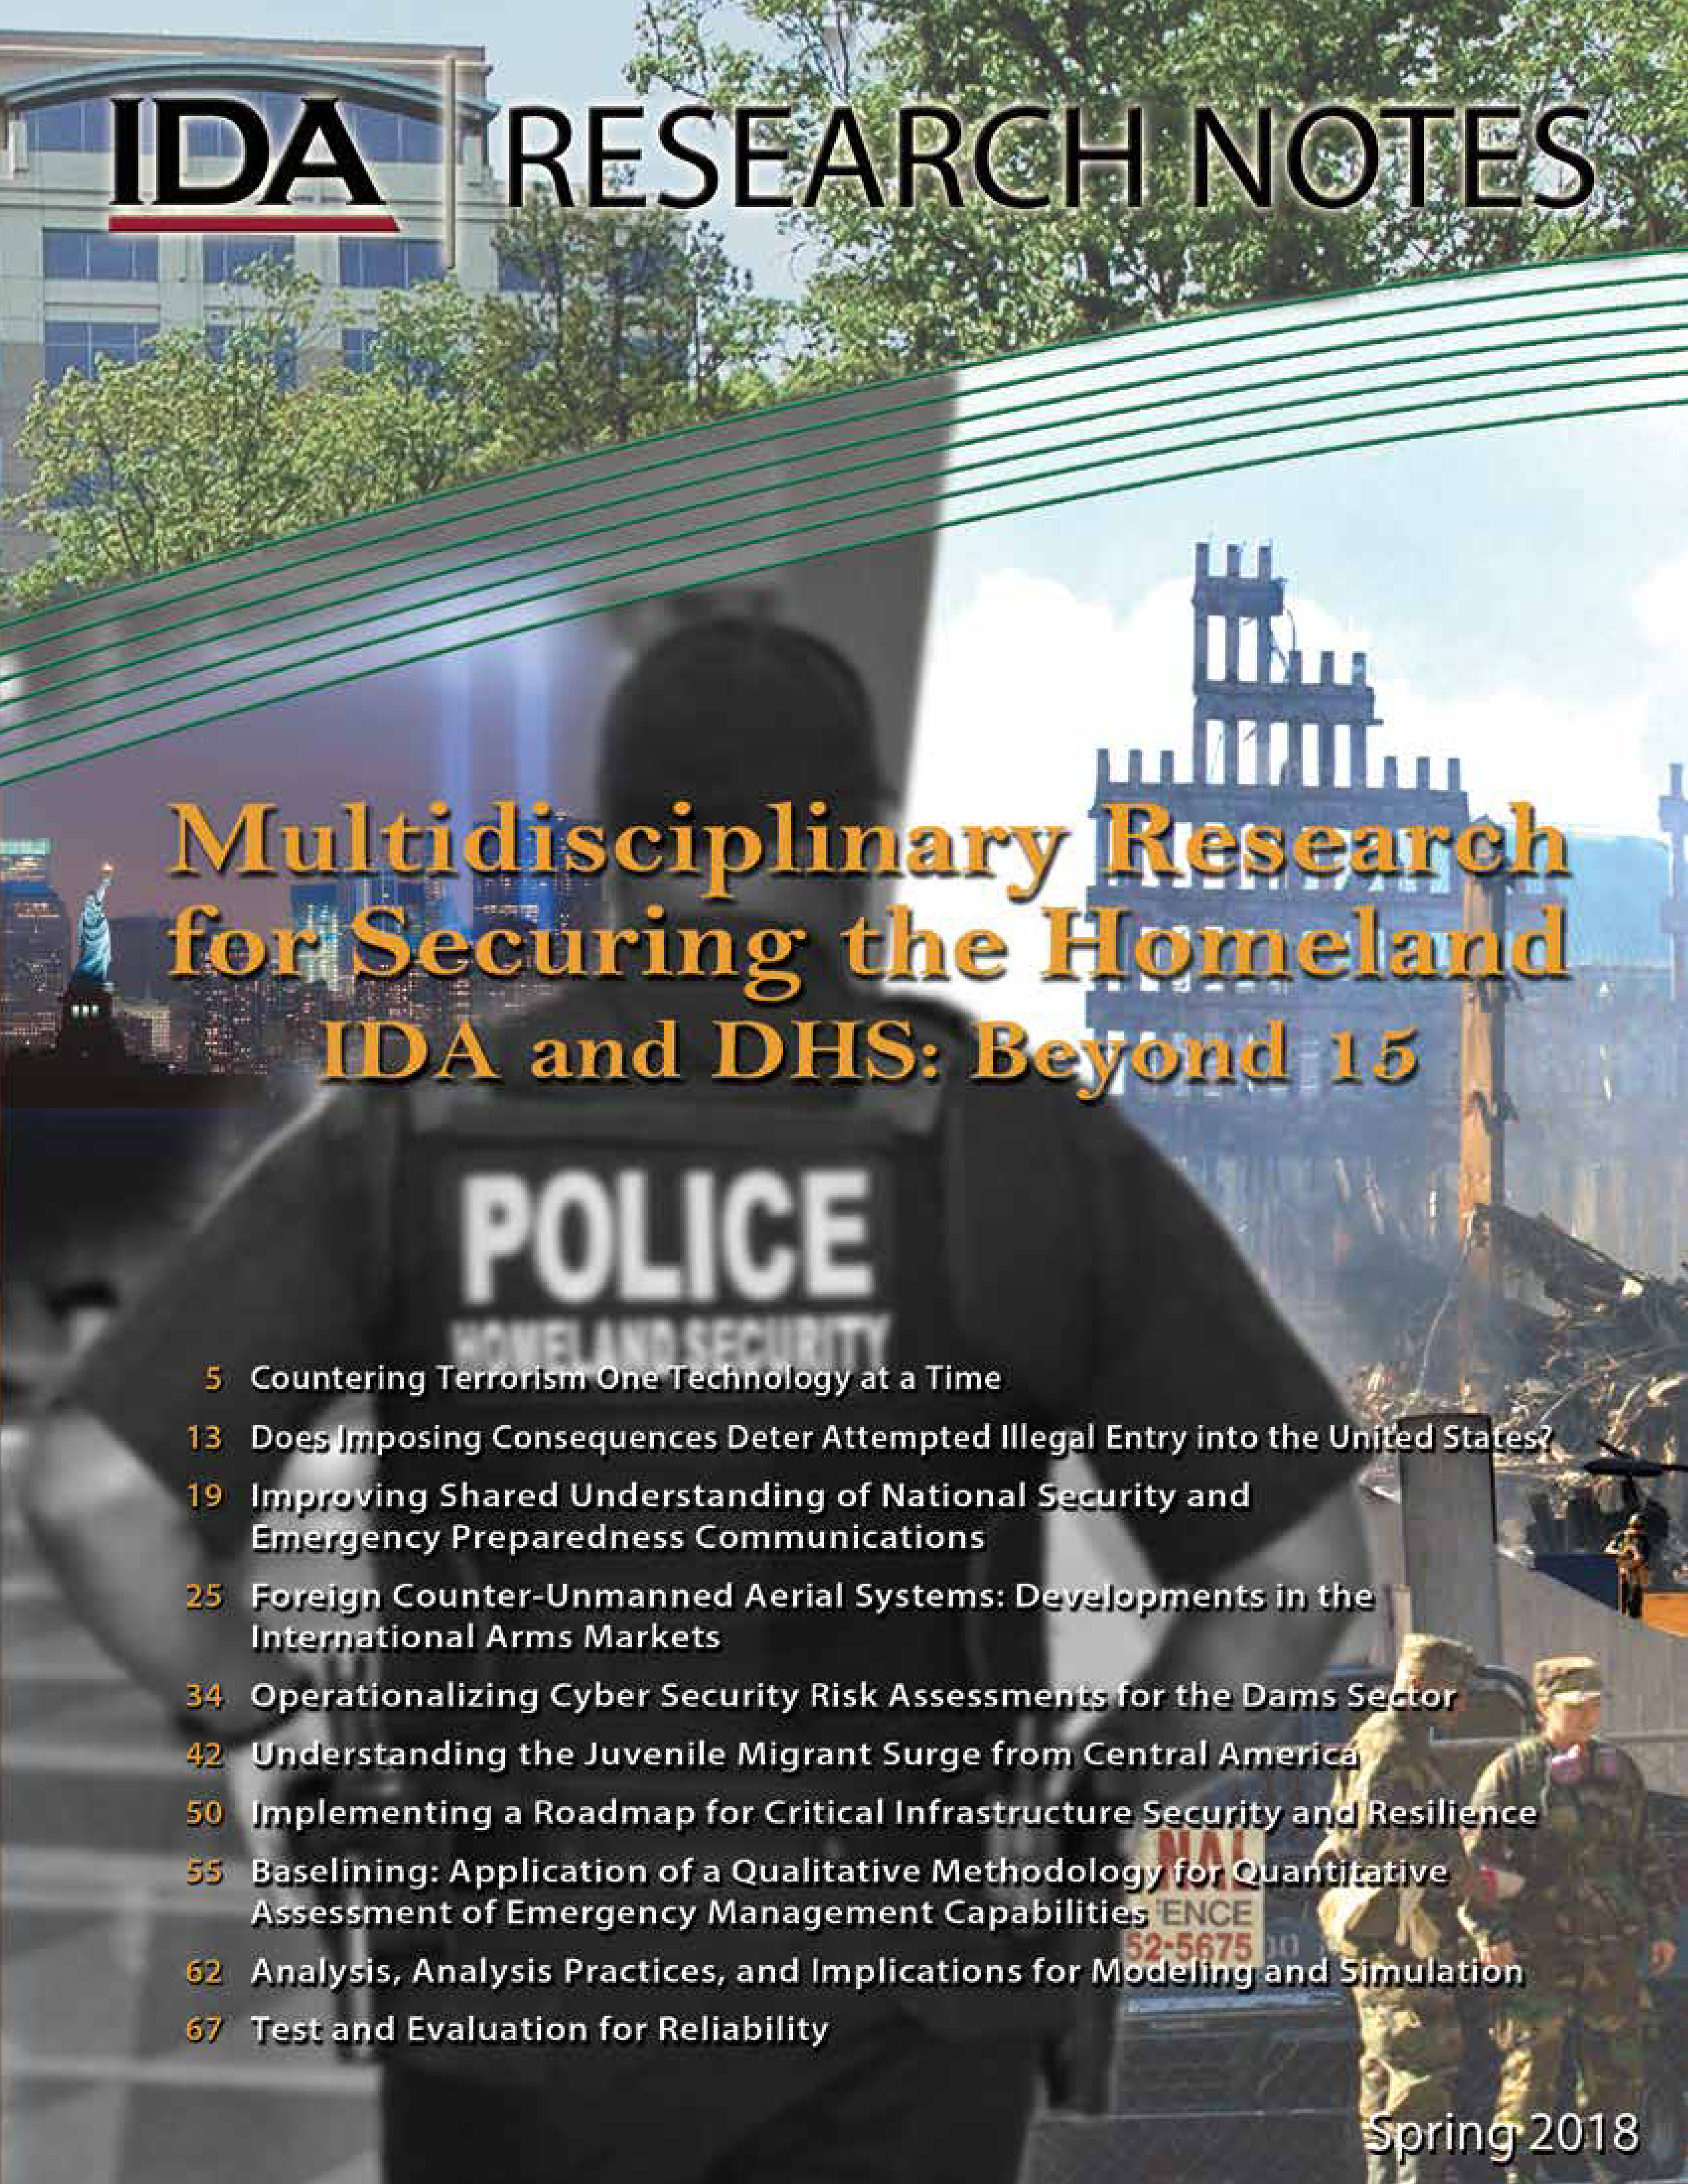 Multidisciplinary Research for Securing the Homeland IDA and DHS: Beyond 15